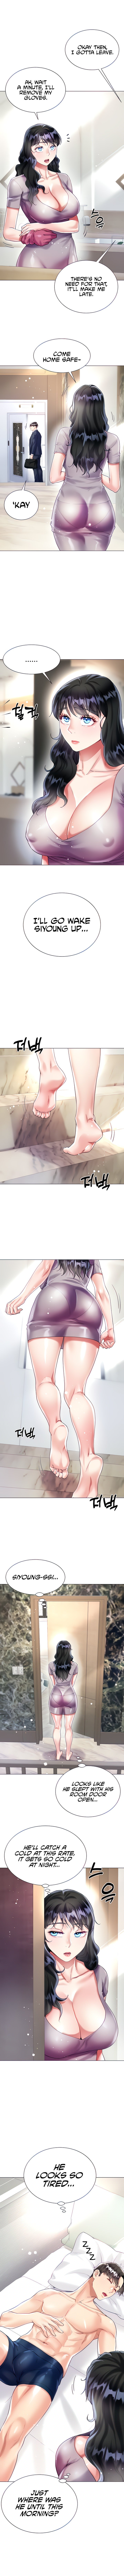 my-sister-in-laws-skirt-chap-21-2